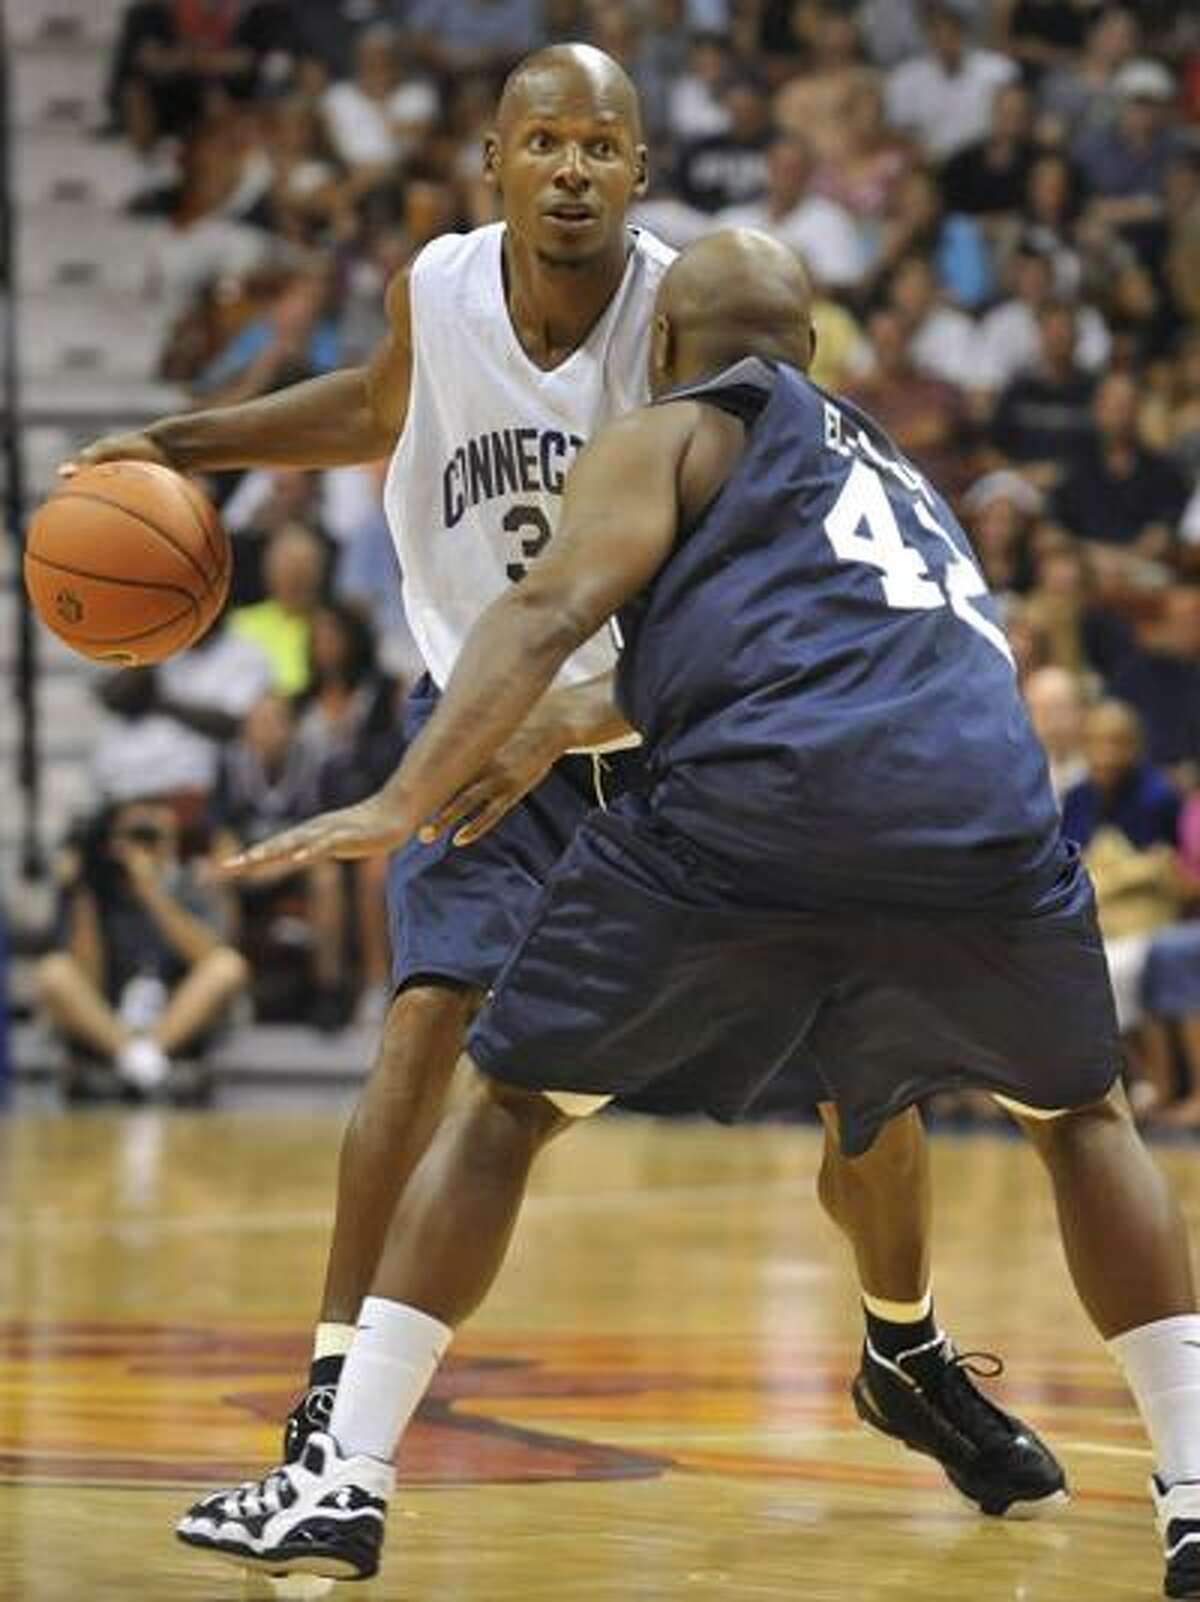 Ray Allen is guarded by Khalid El-Amin during the Jim Calhoun Celebrity Classic Charity All-Star basketball game Saturday in Uncasville. (Associated Press/Jessica Hill)